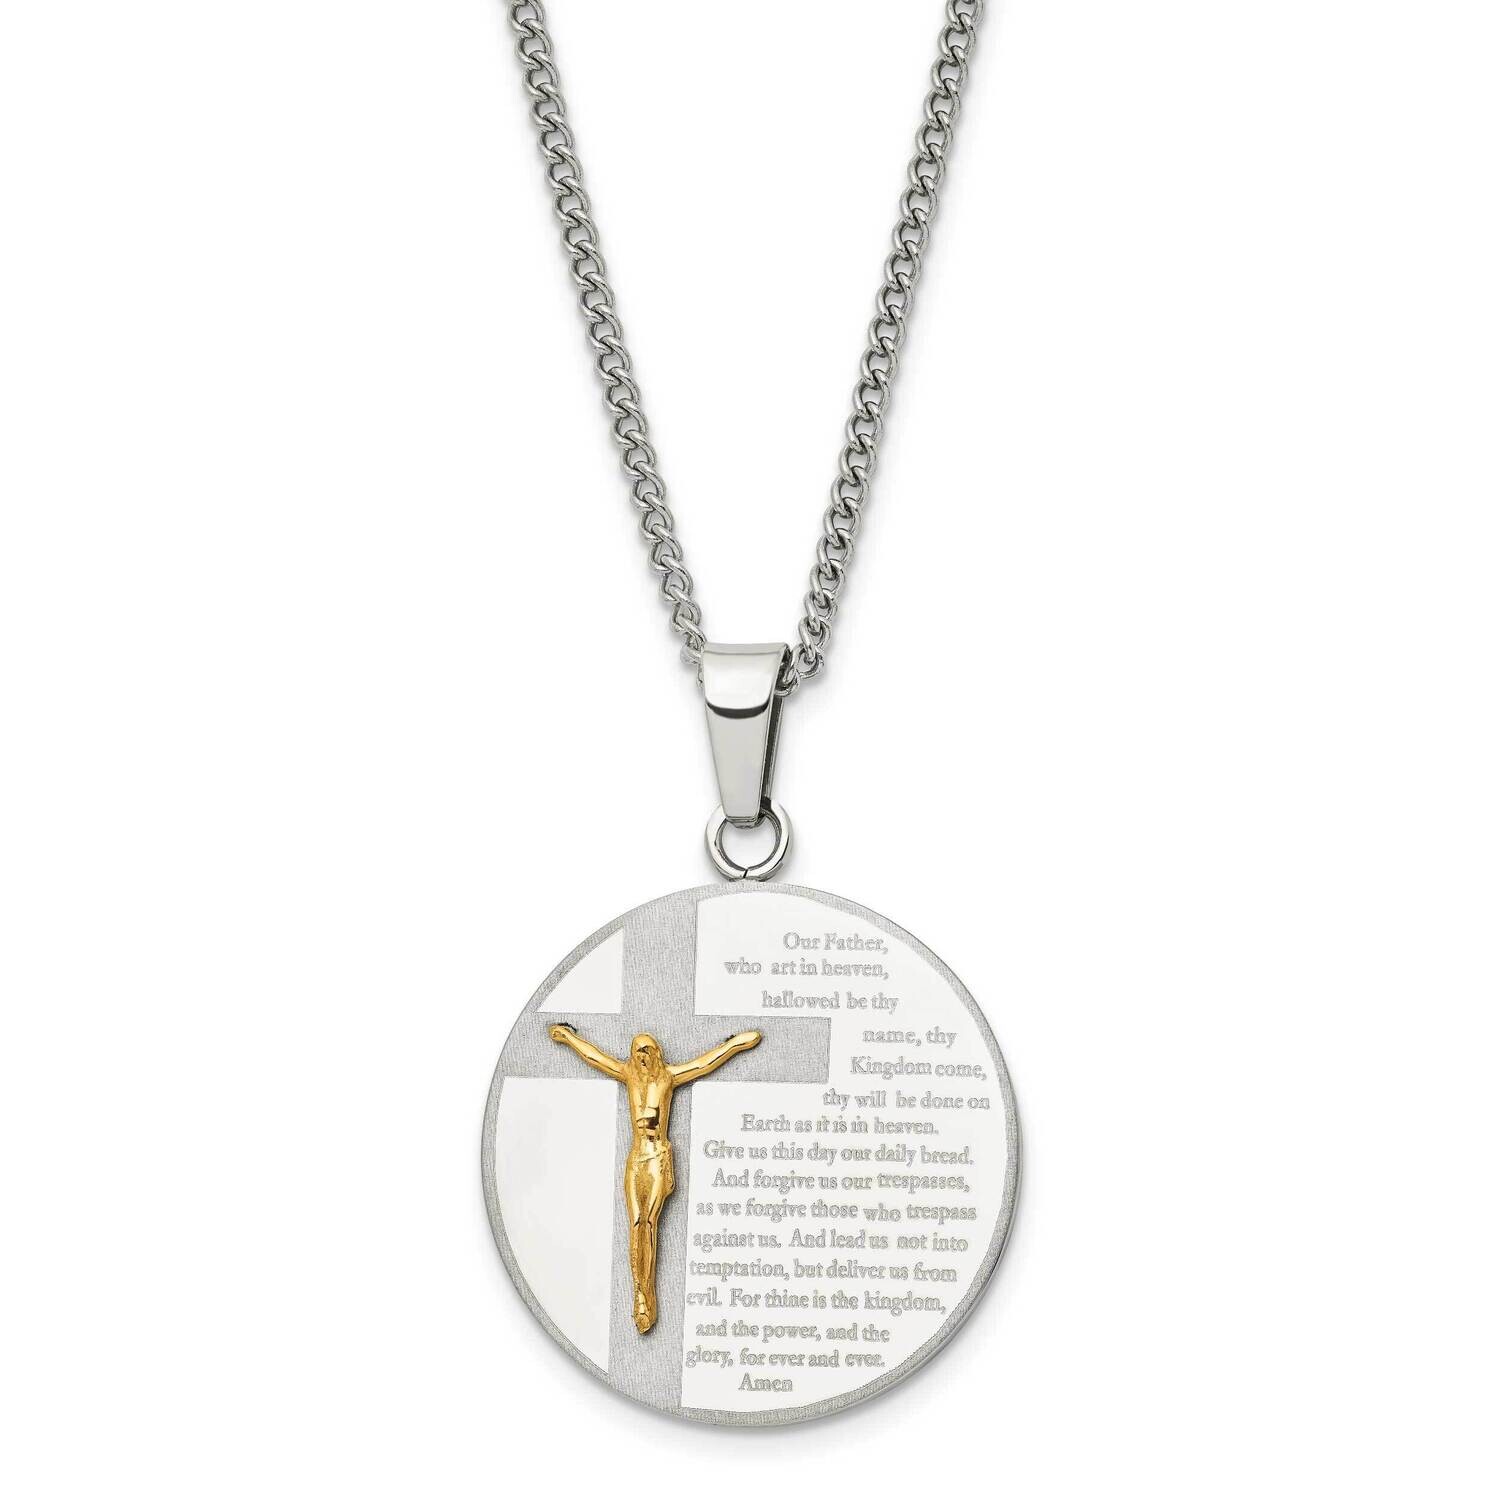 Chisel Brushed Polished Yellow Ip-Plated Lords Prayer Crucifx Pendant On A 24 Inch Curb Chain Necklace Stainless Steel SRN3091-24